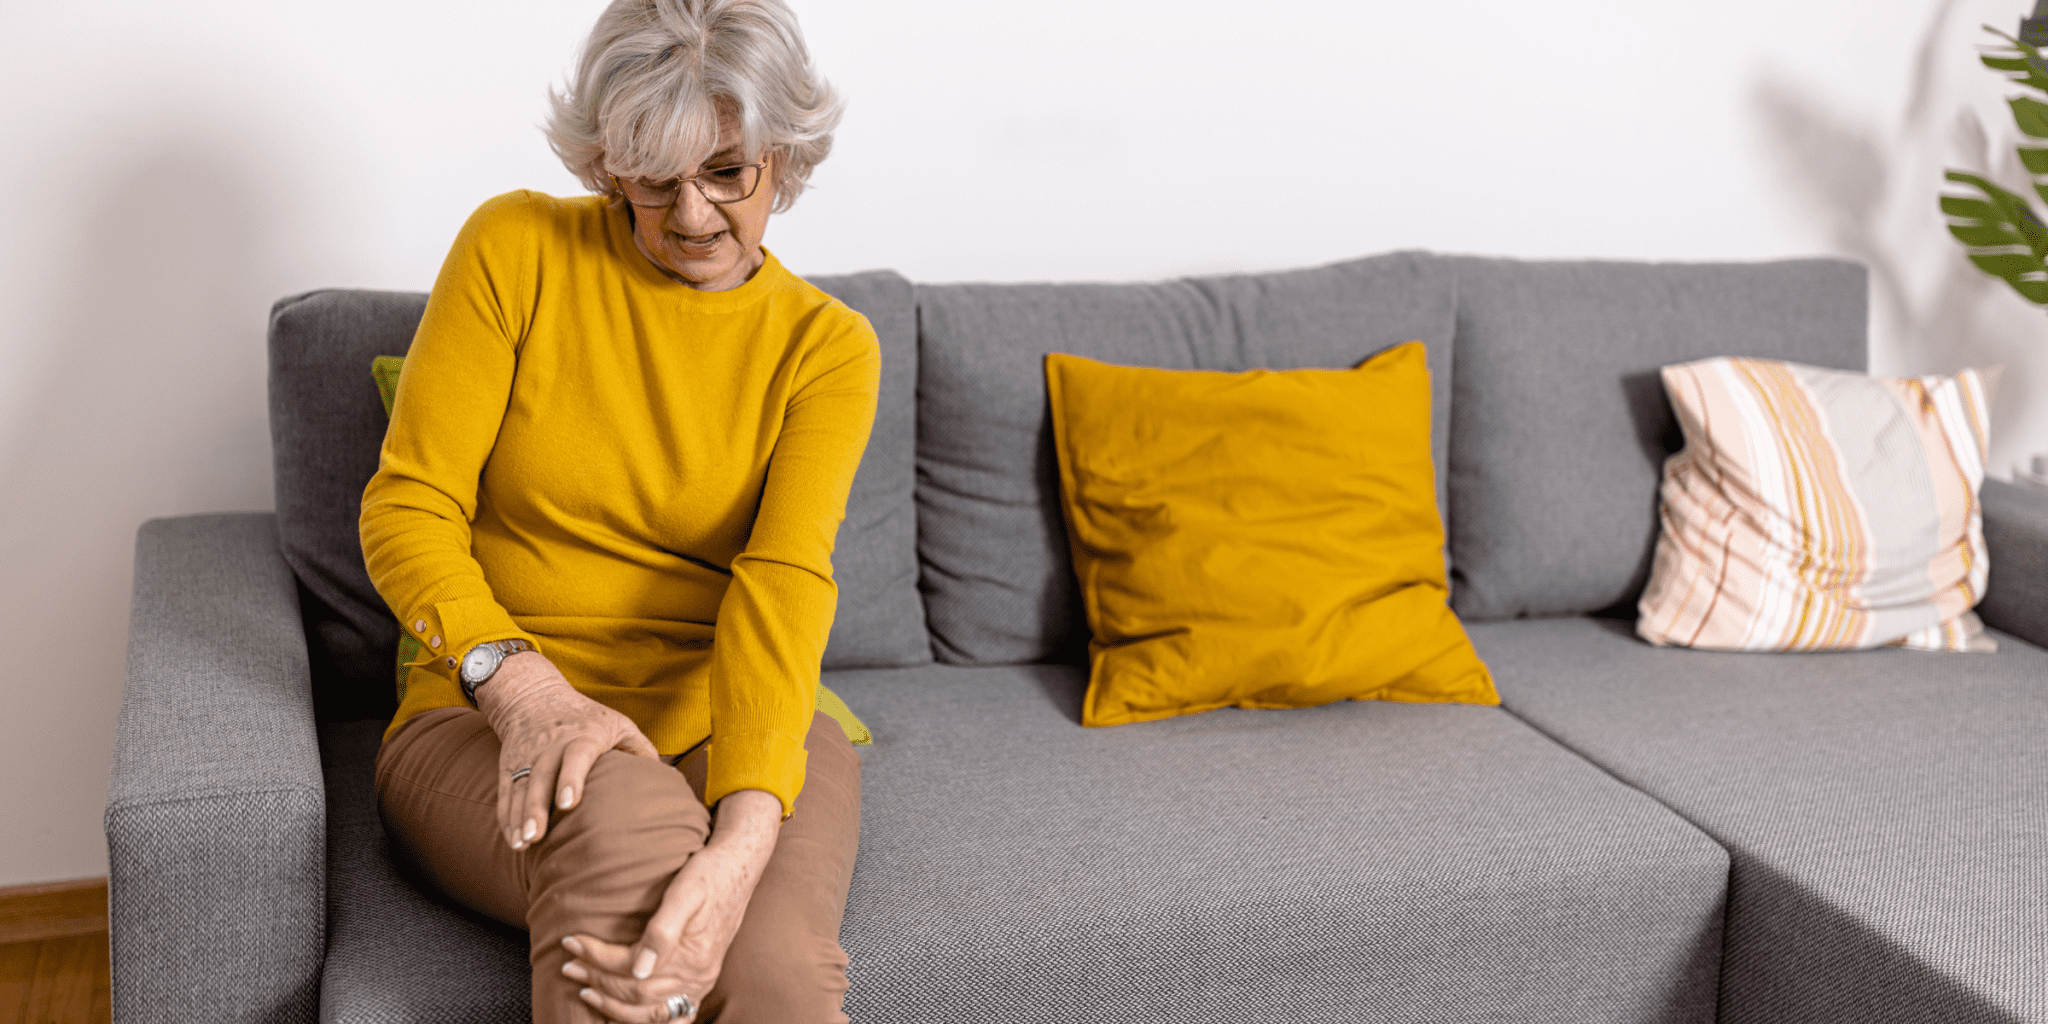 senior woman wearing yellow shirt sitting on gray couch holding knee hurting with chronic arthritis pain